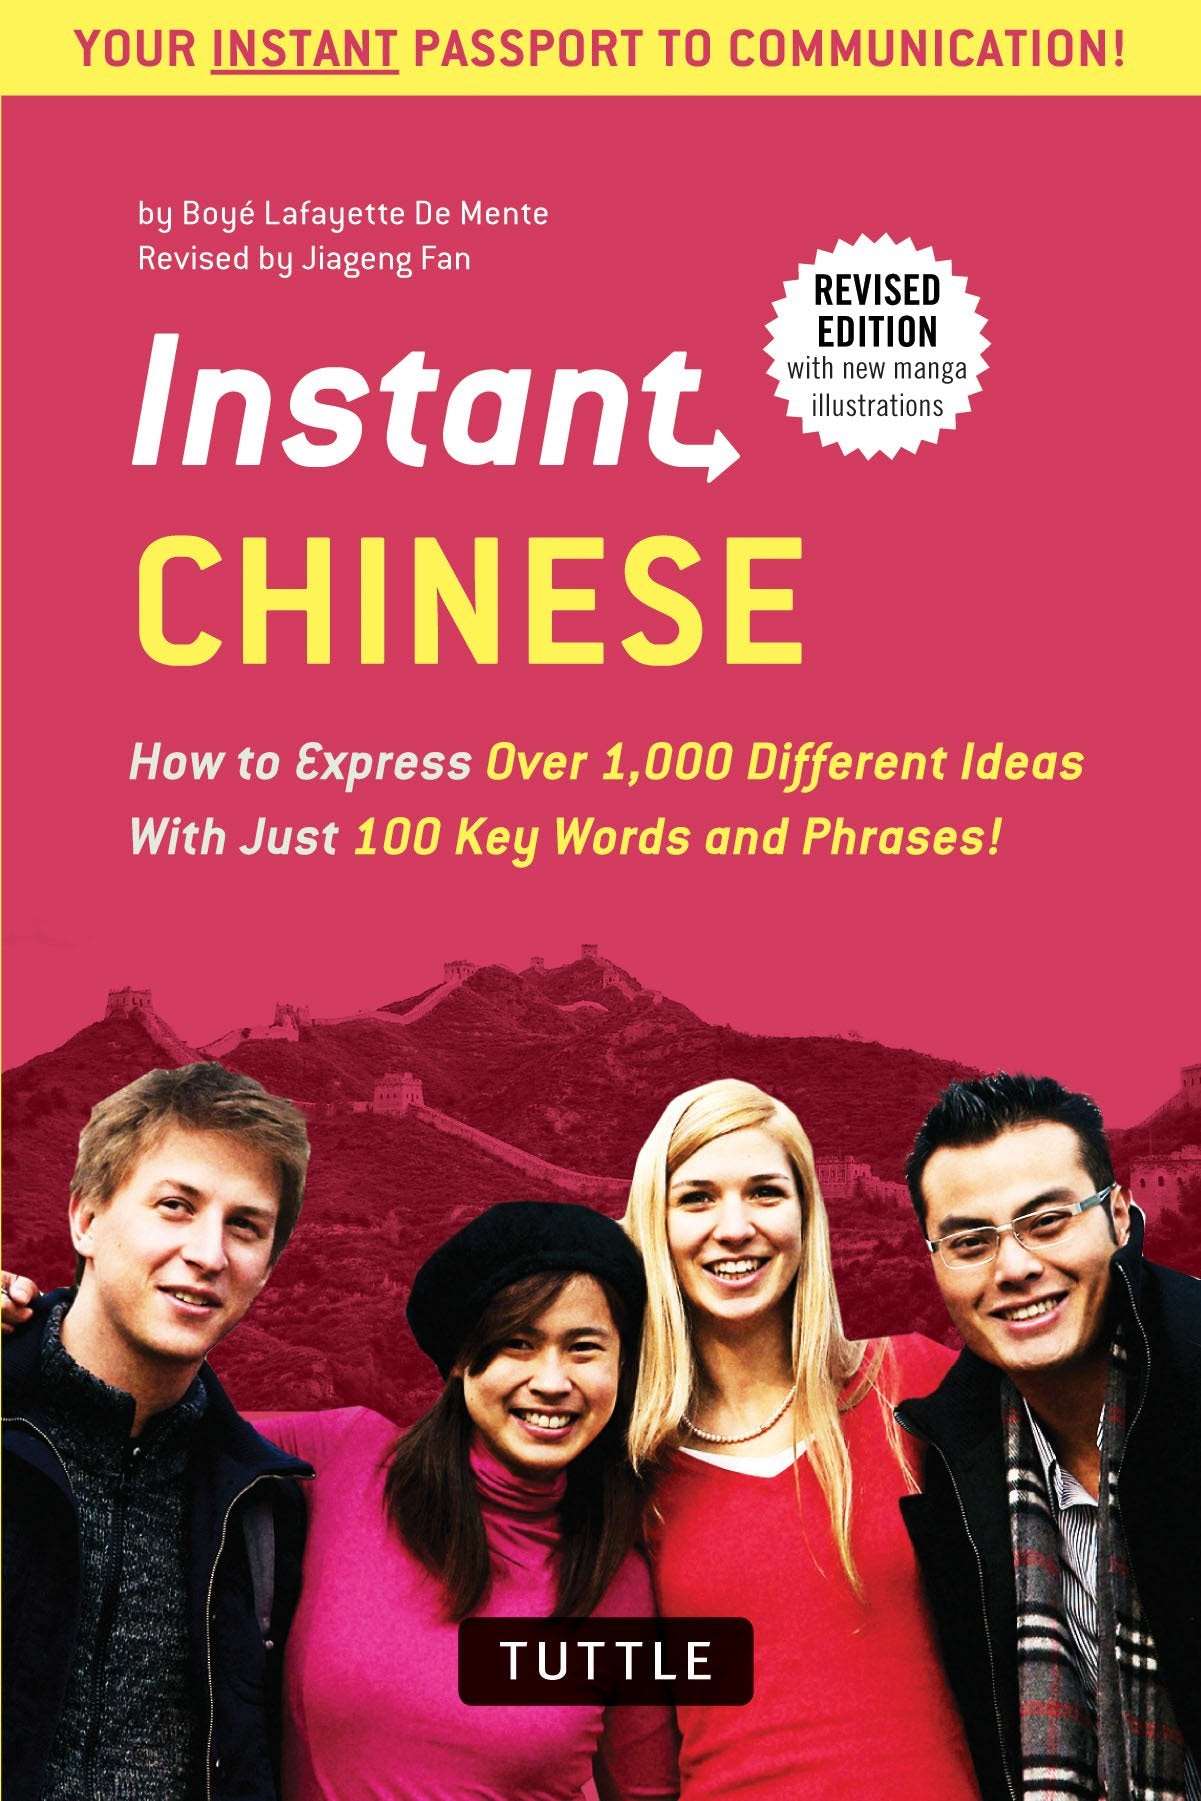 INSTANT CHINESE